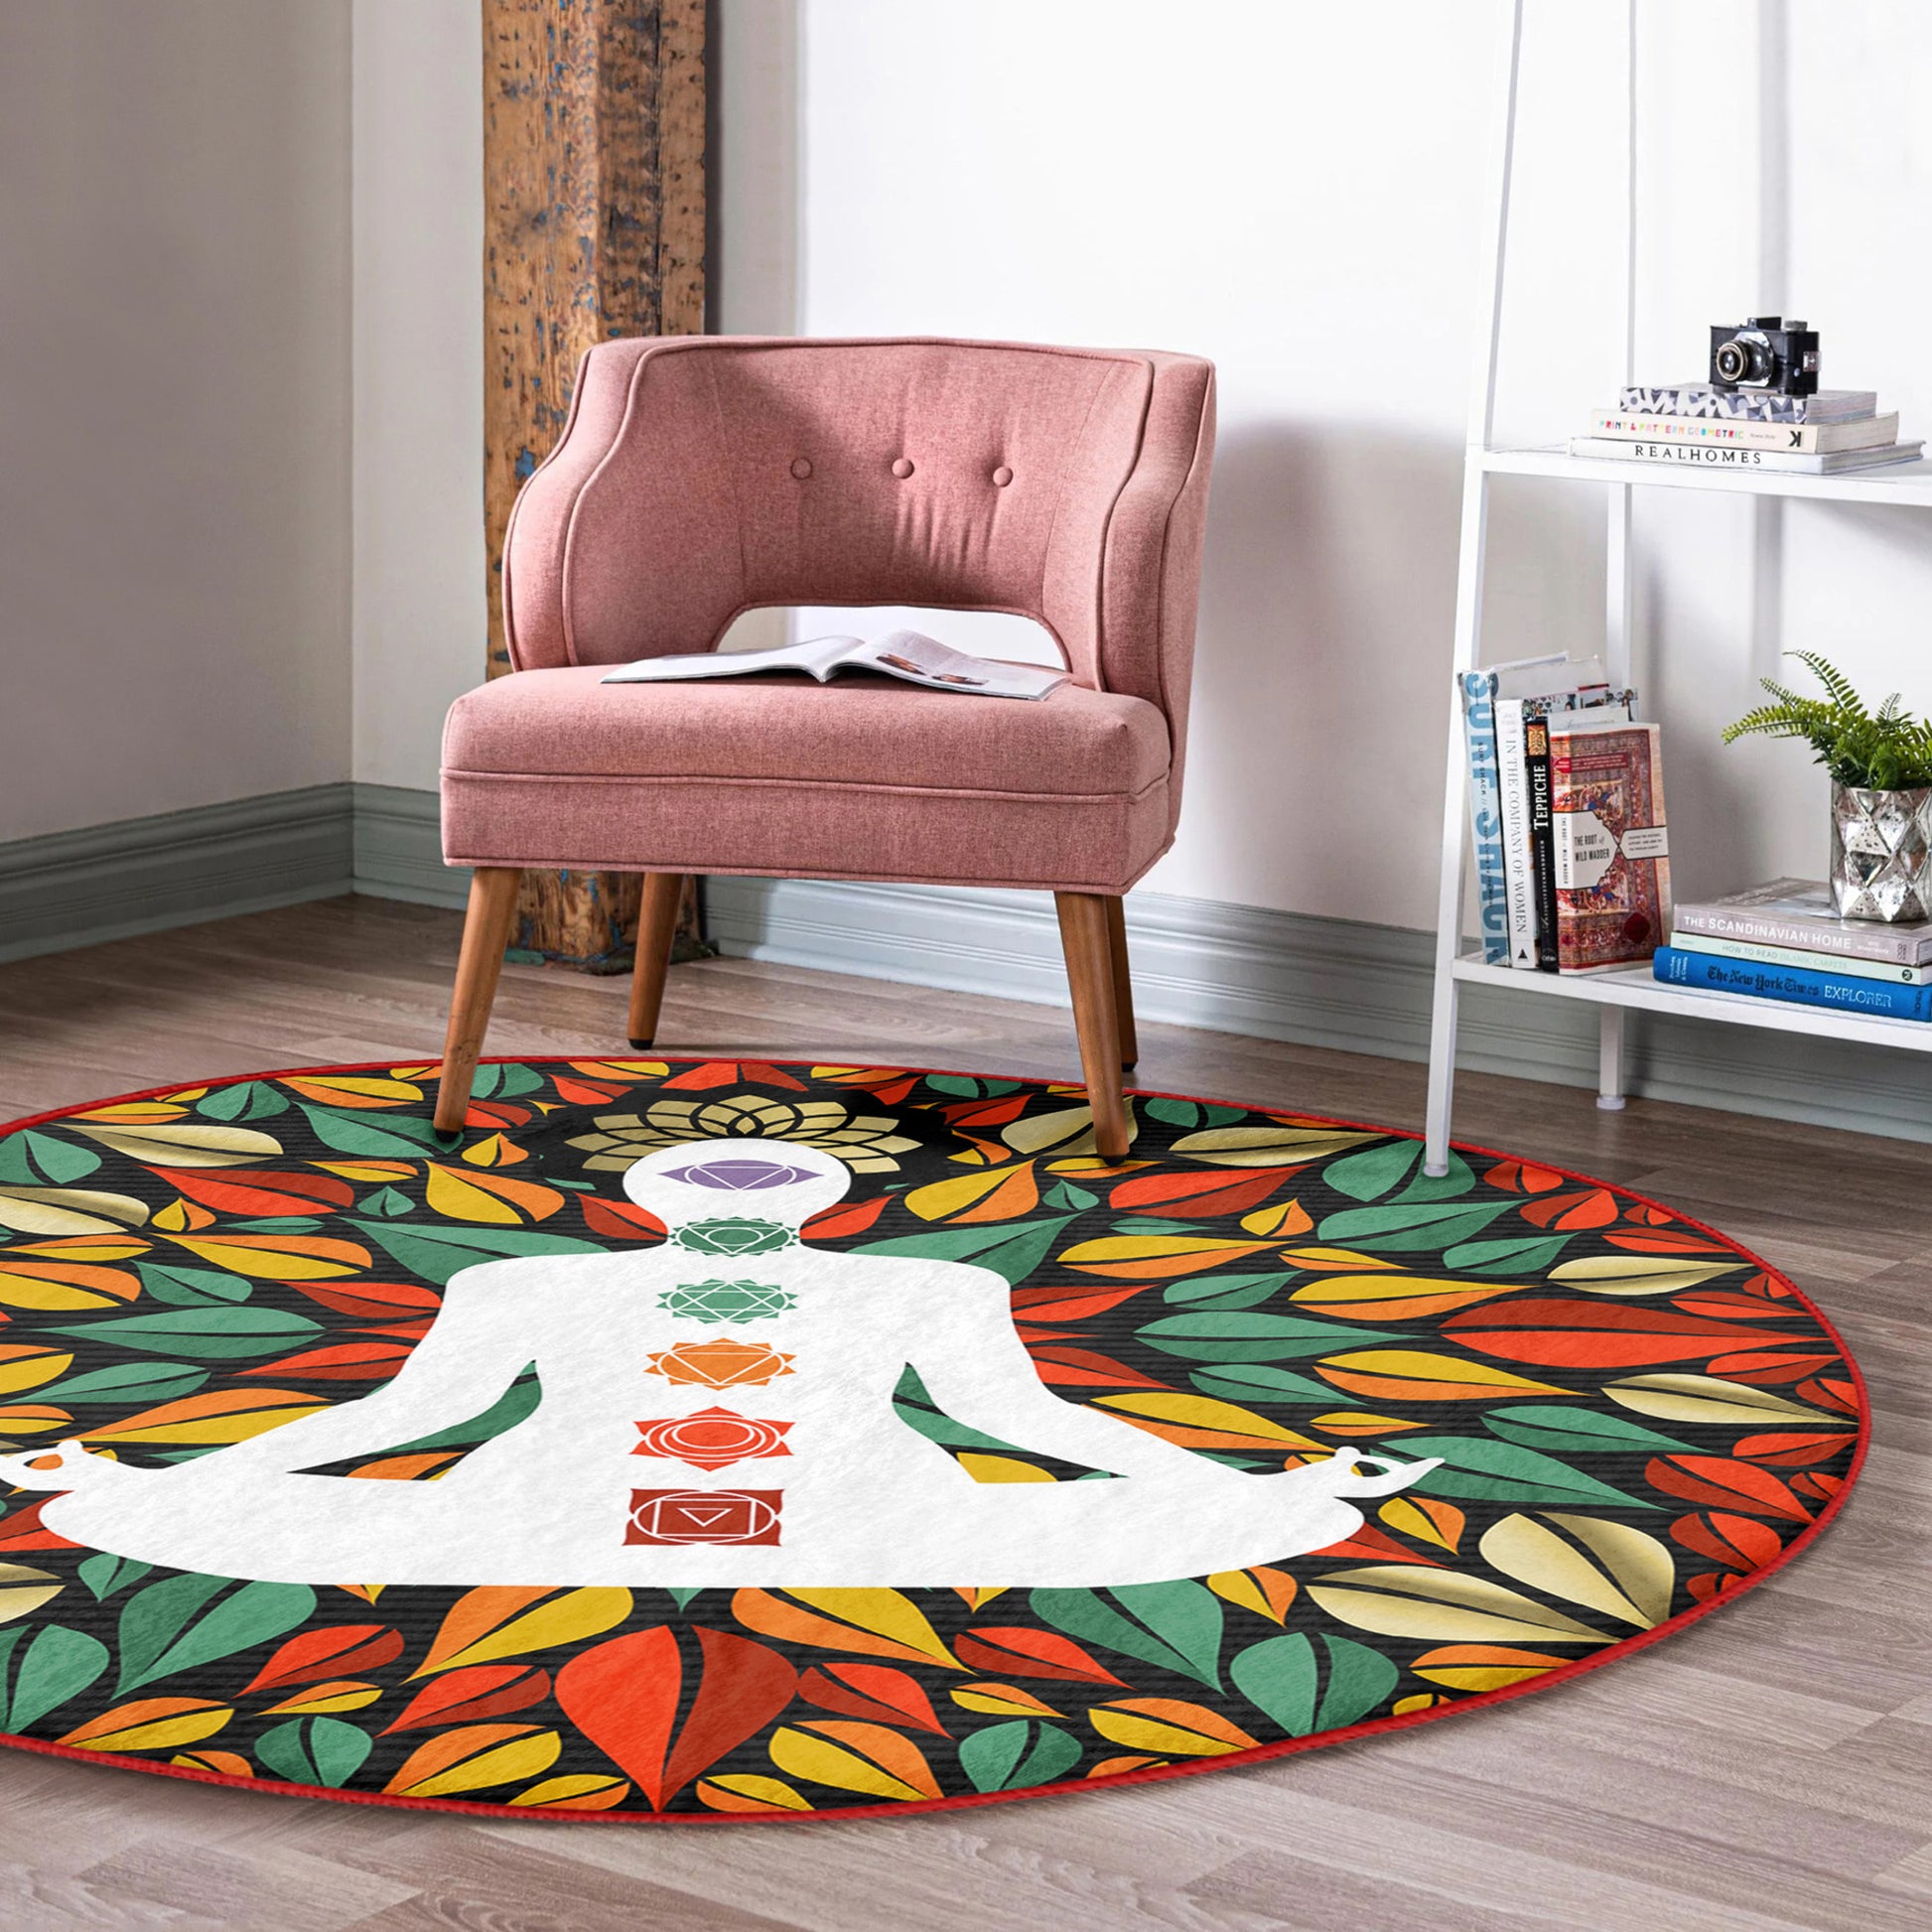 Round Patterned Floor Rug - Meditative Ambiance Accent